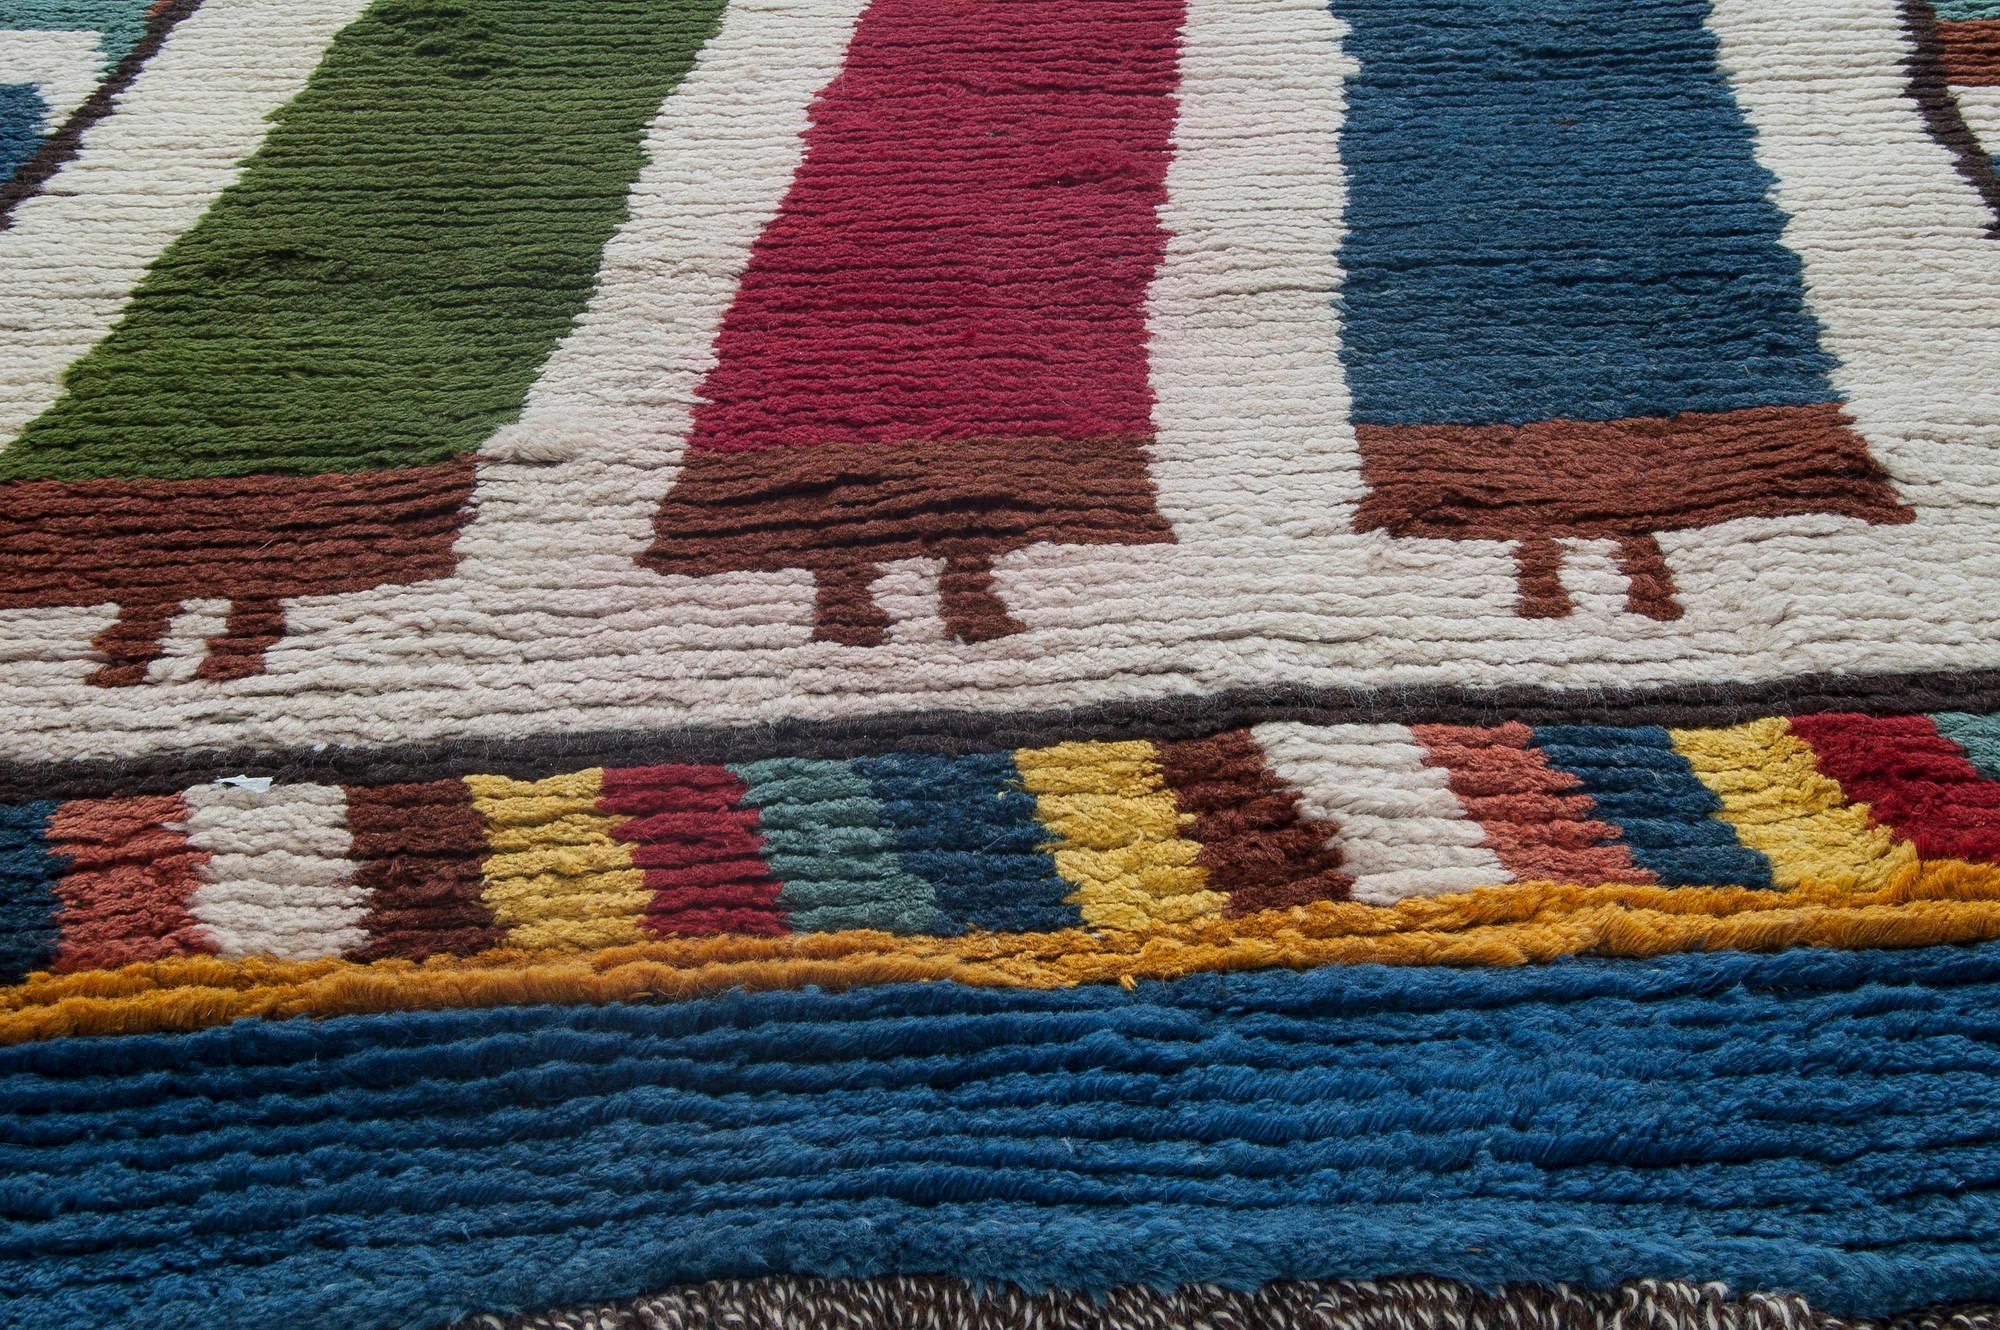 Mid-20th century Moroccan red, green, yellow and navy blue handmade wool rug
Size: 5'7